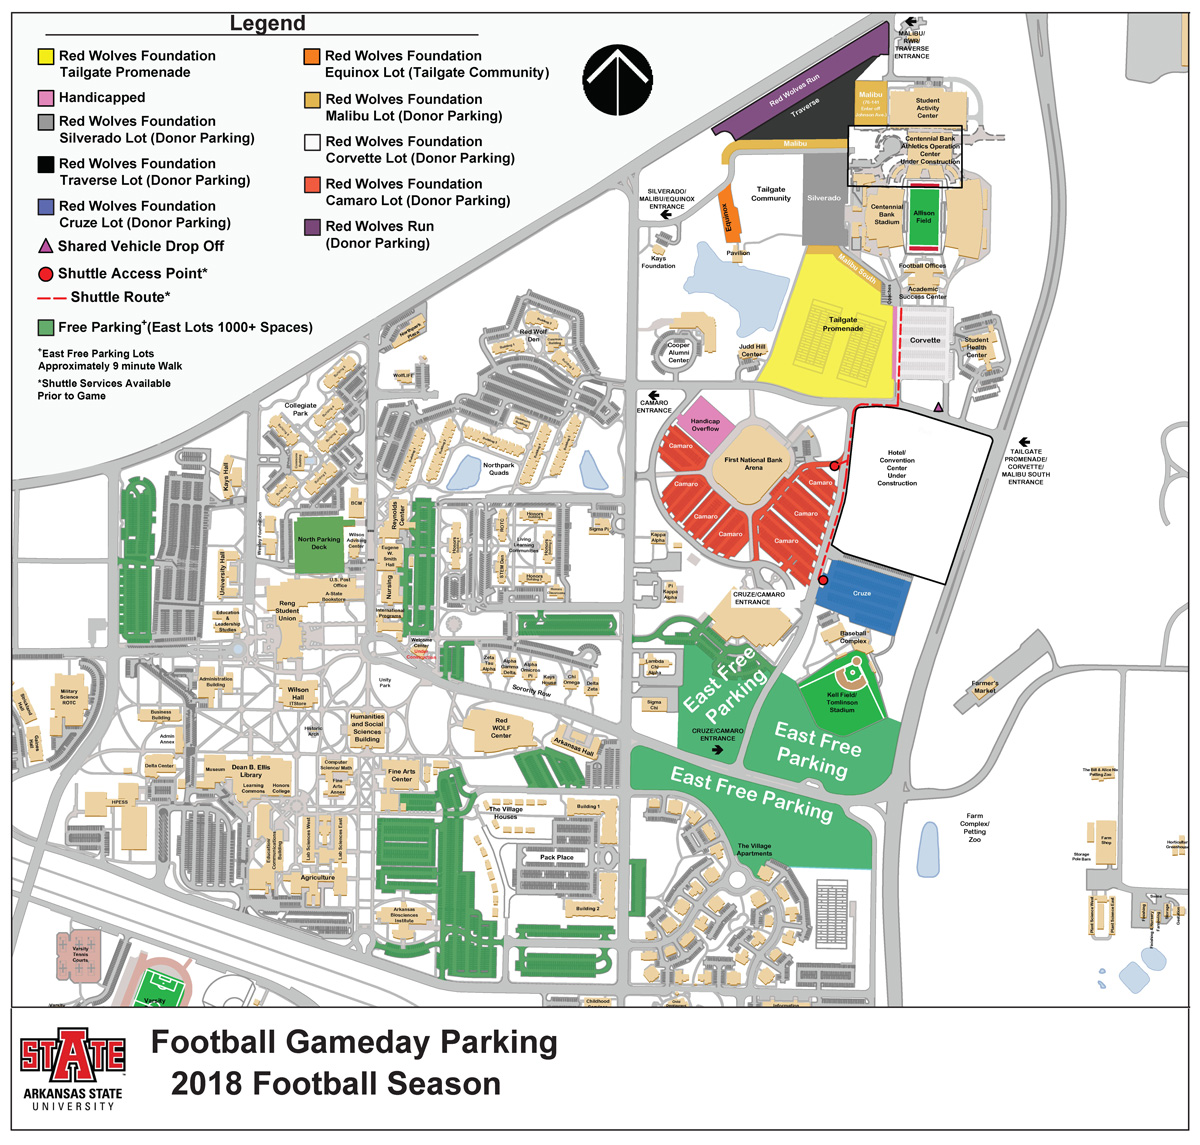 Arkansas State University Campus Map A State Announces Changes to Gameday Parking